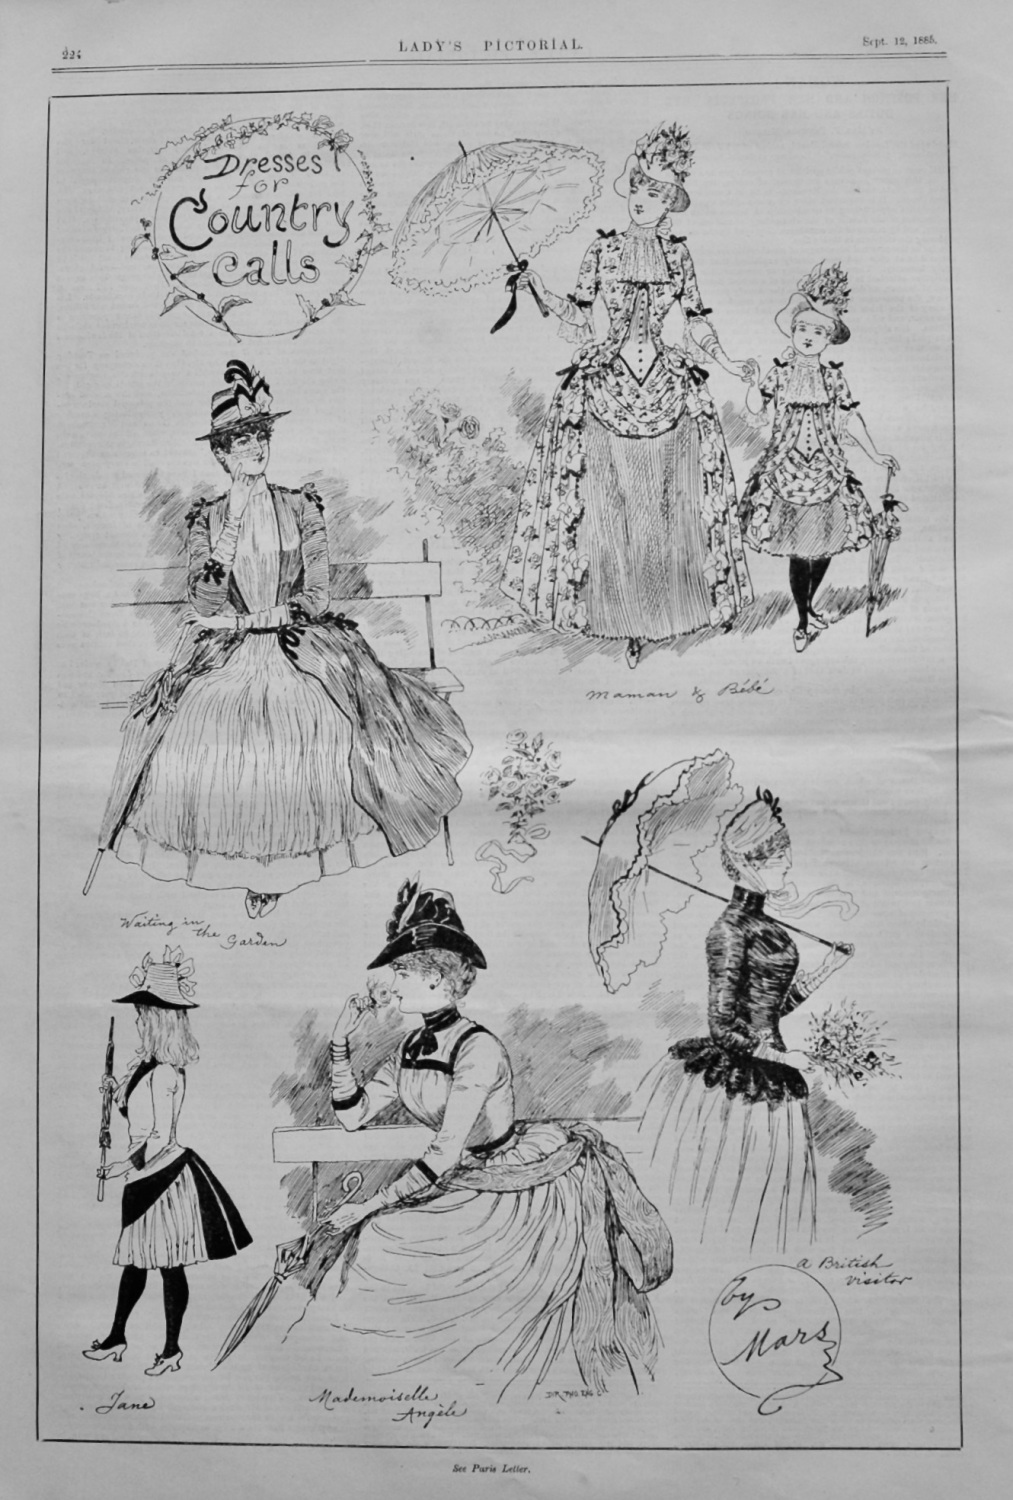 Dresses for Country Calls.  Sketched by Mars.  1885.